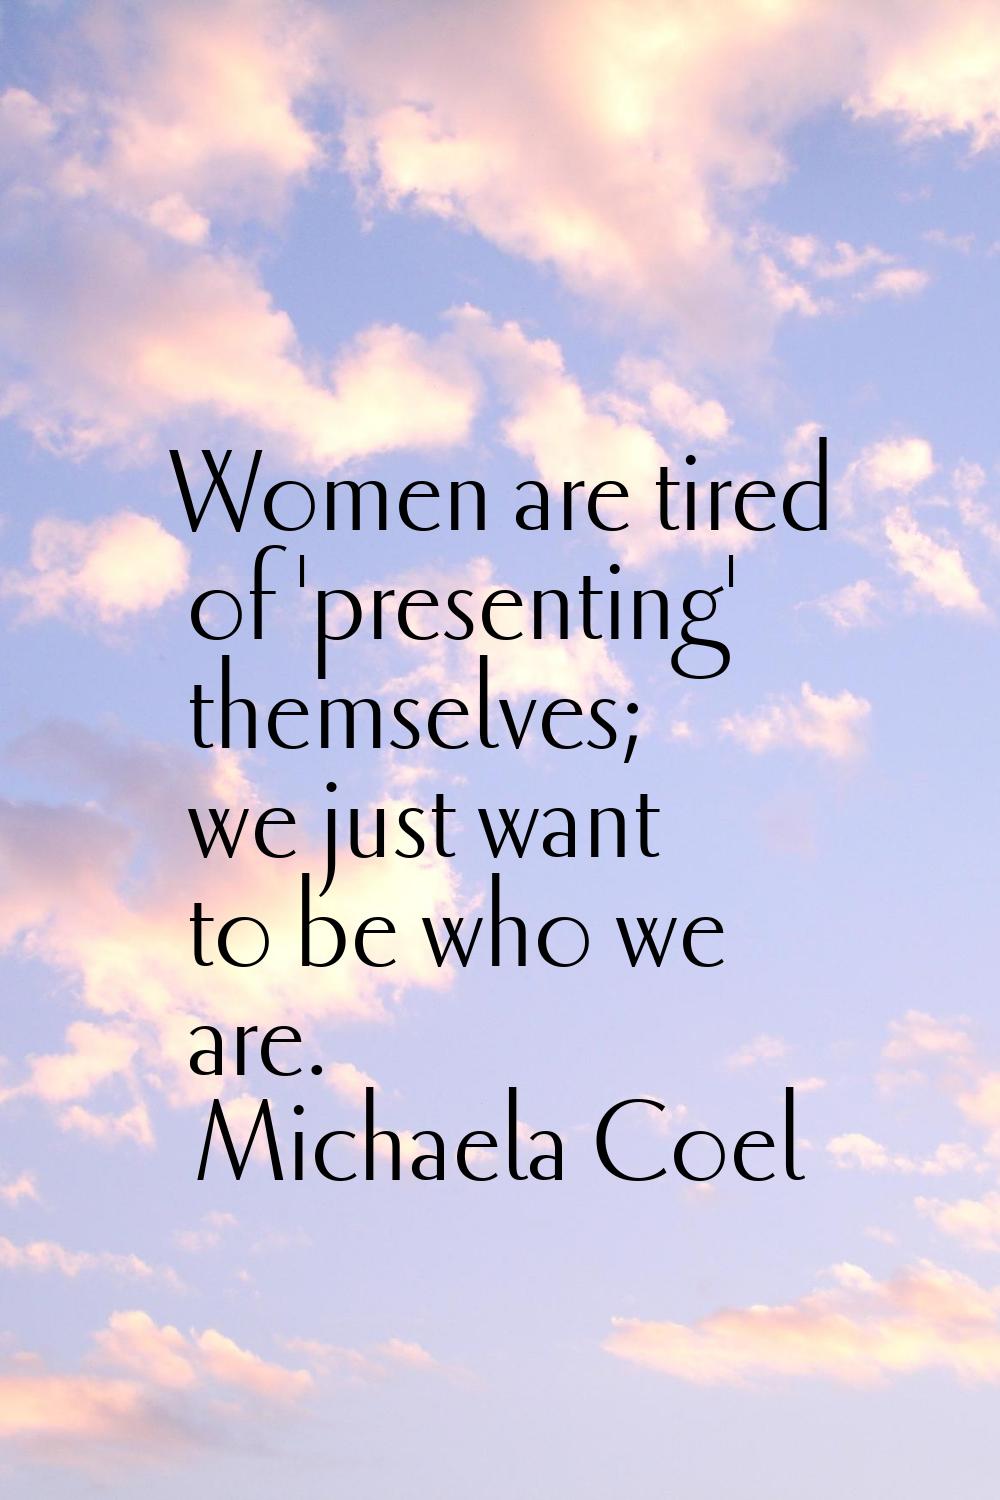 Women are tired of 'presenting' themselves; we just want to be who we are.